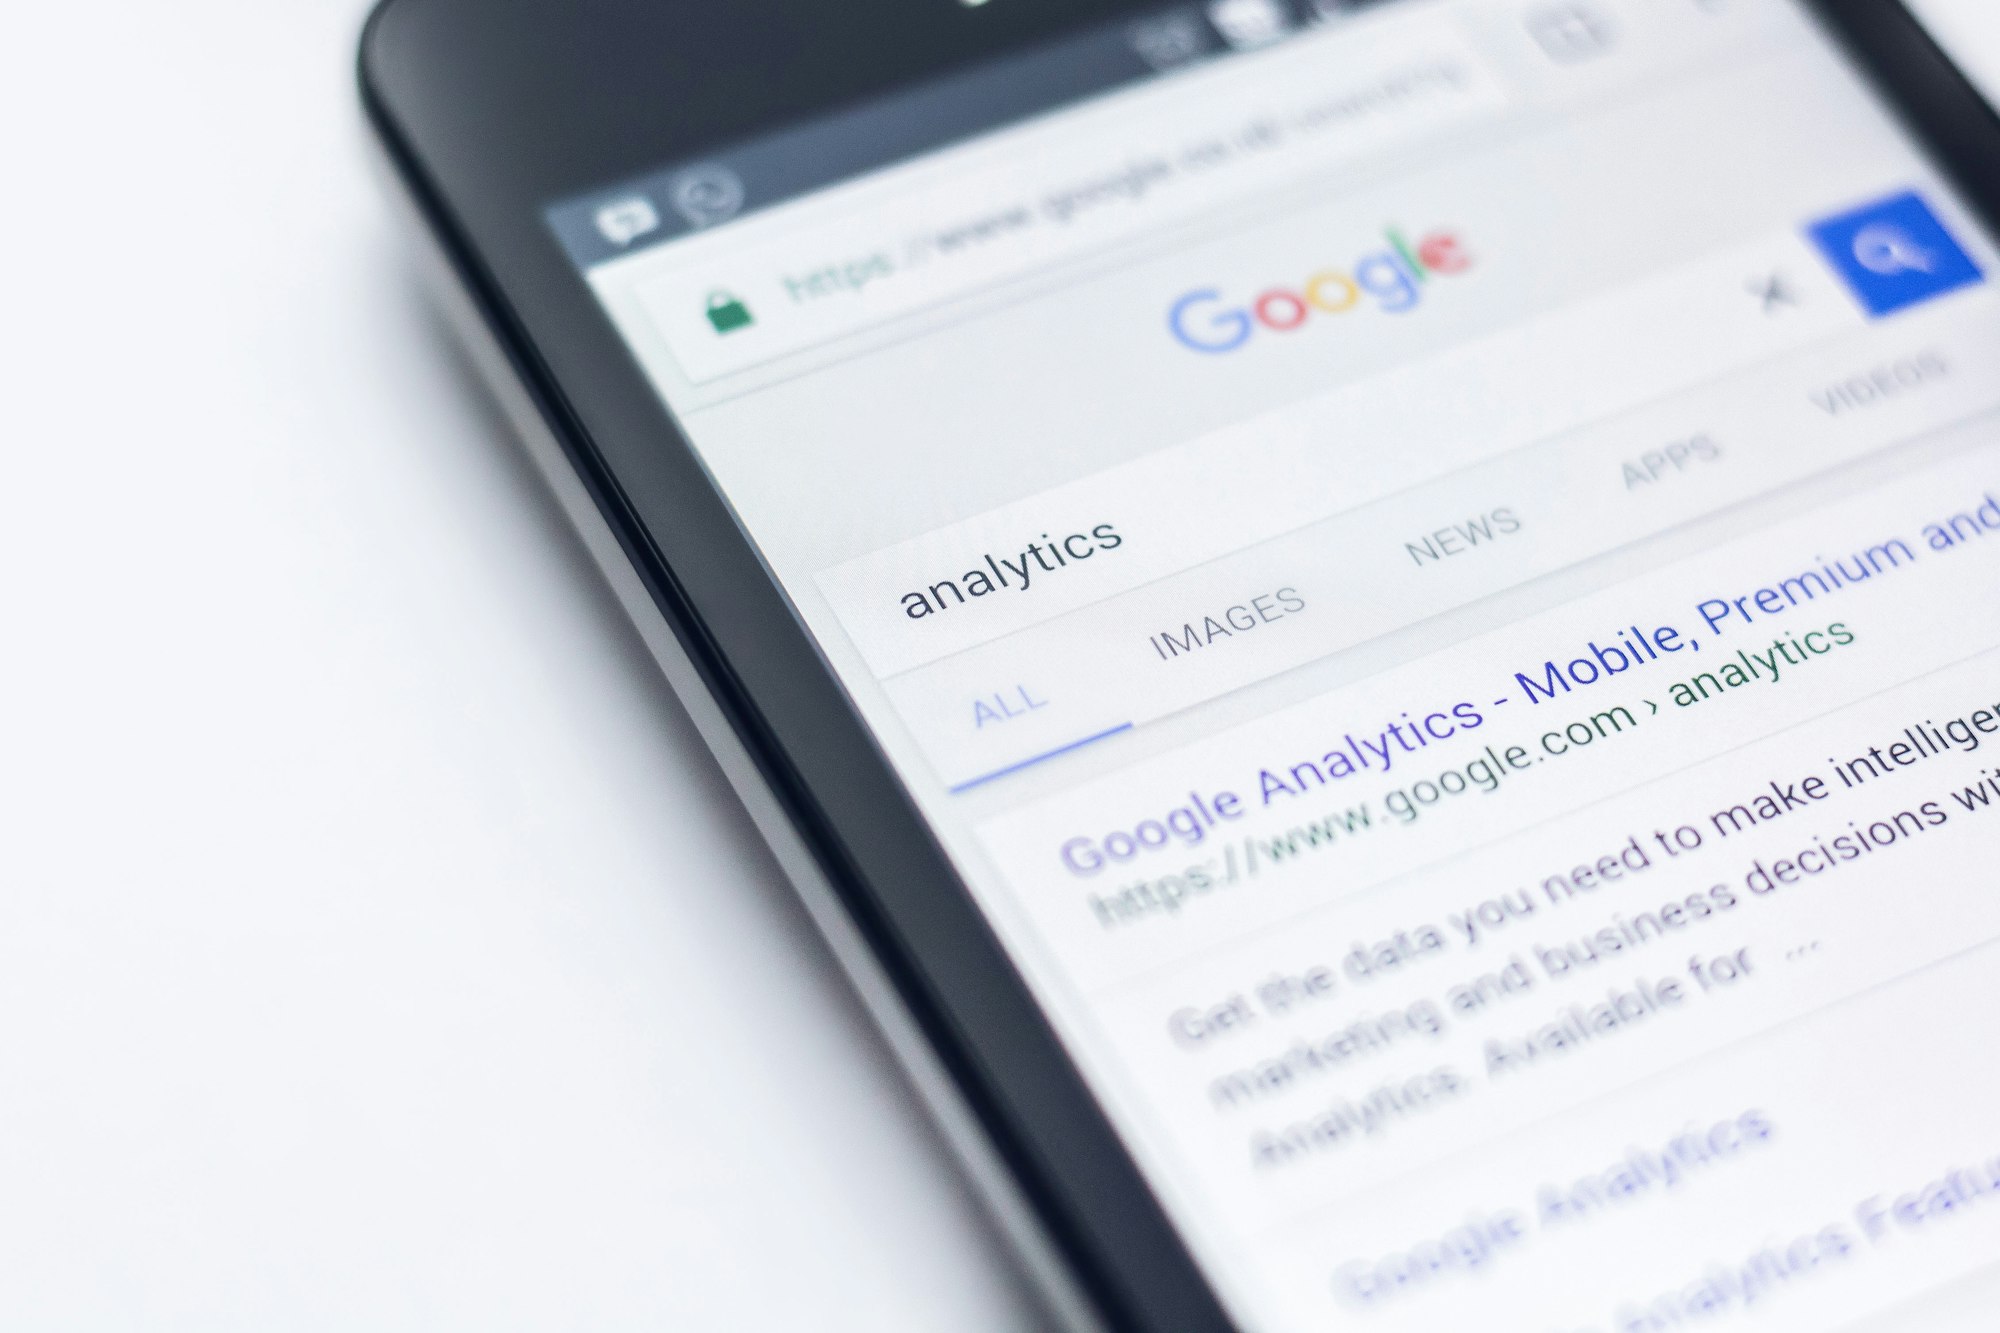 Google is testing a feature that uses AI to generate summarized results